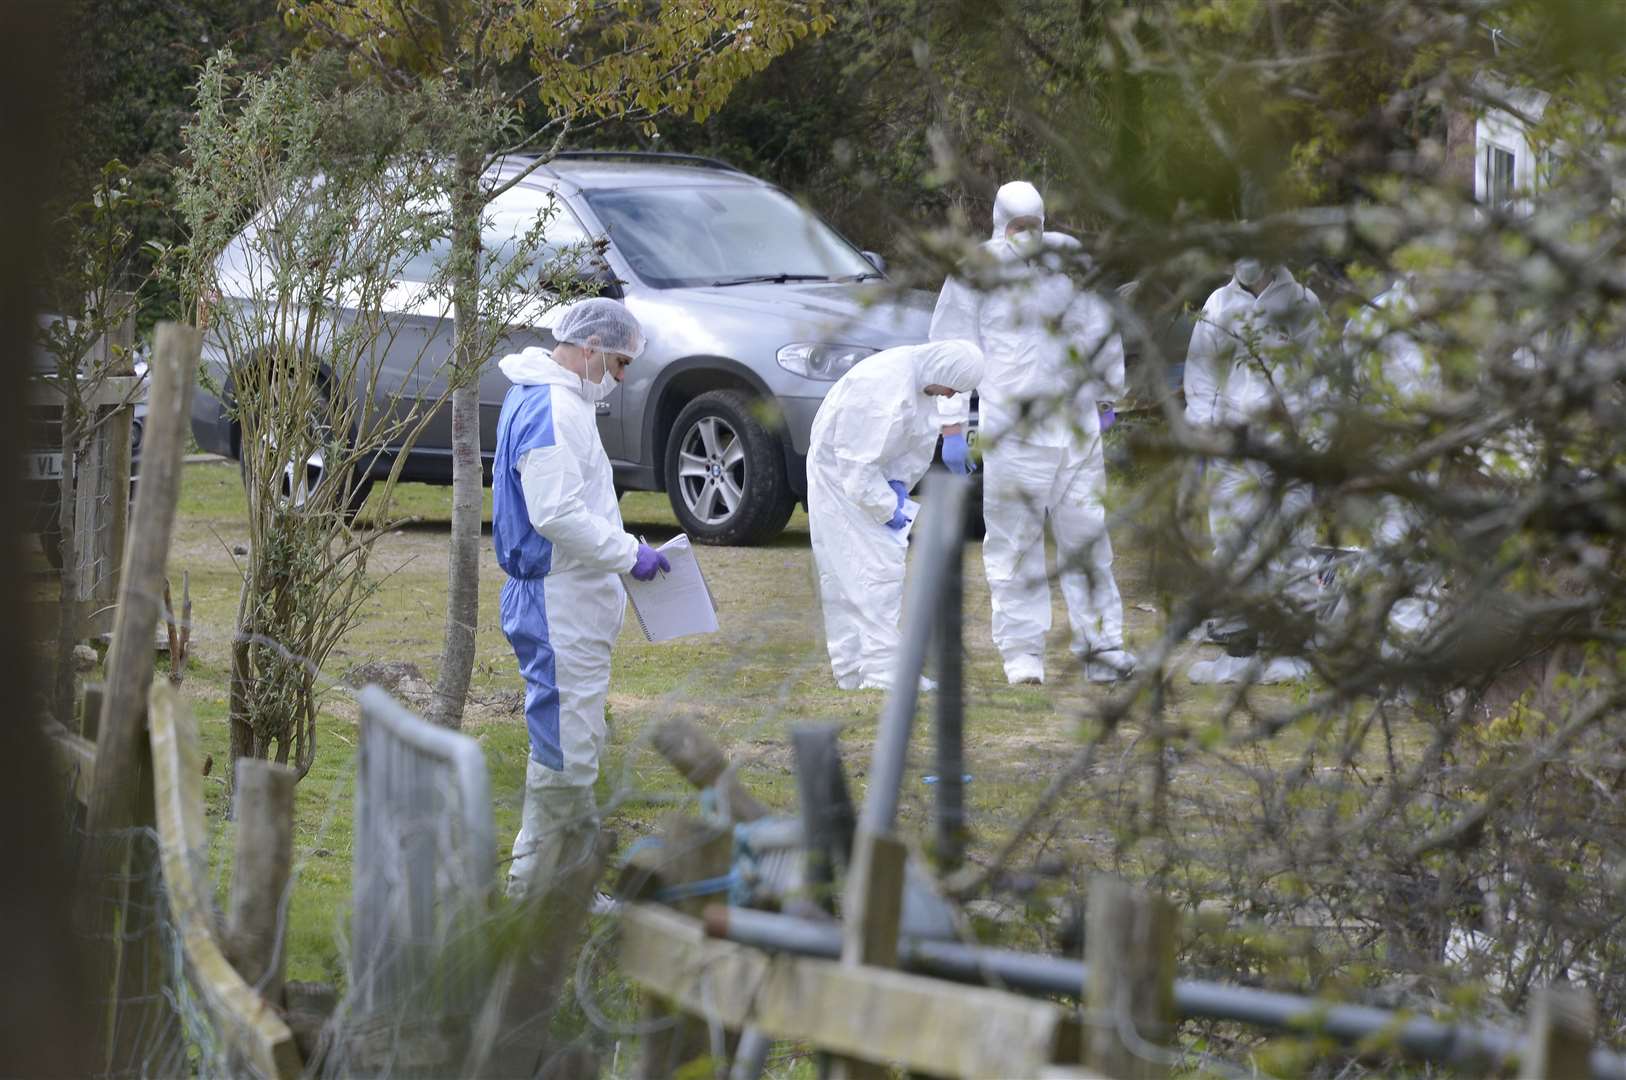 Goudhurst Police shooting. Police at the scenePicture: Paul Amos FM4322354 (42101181)